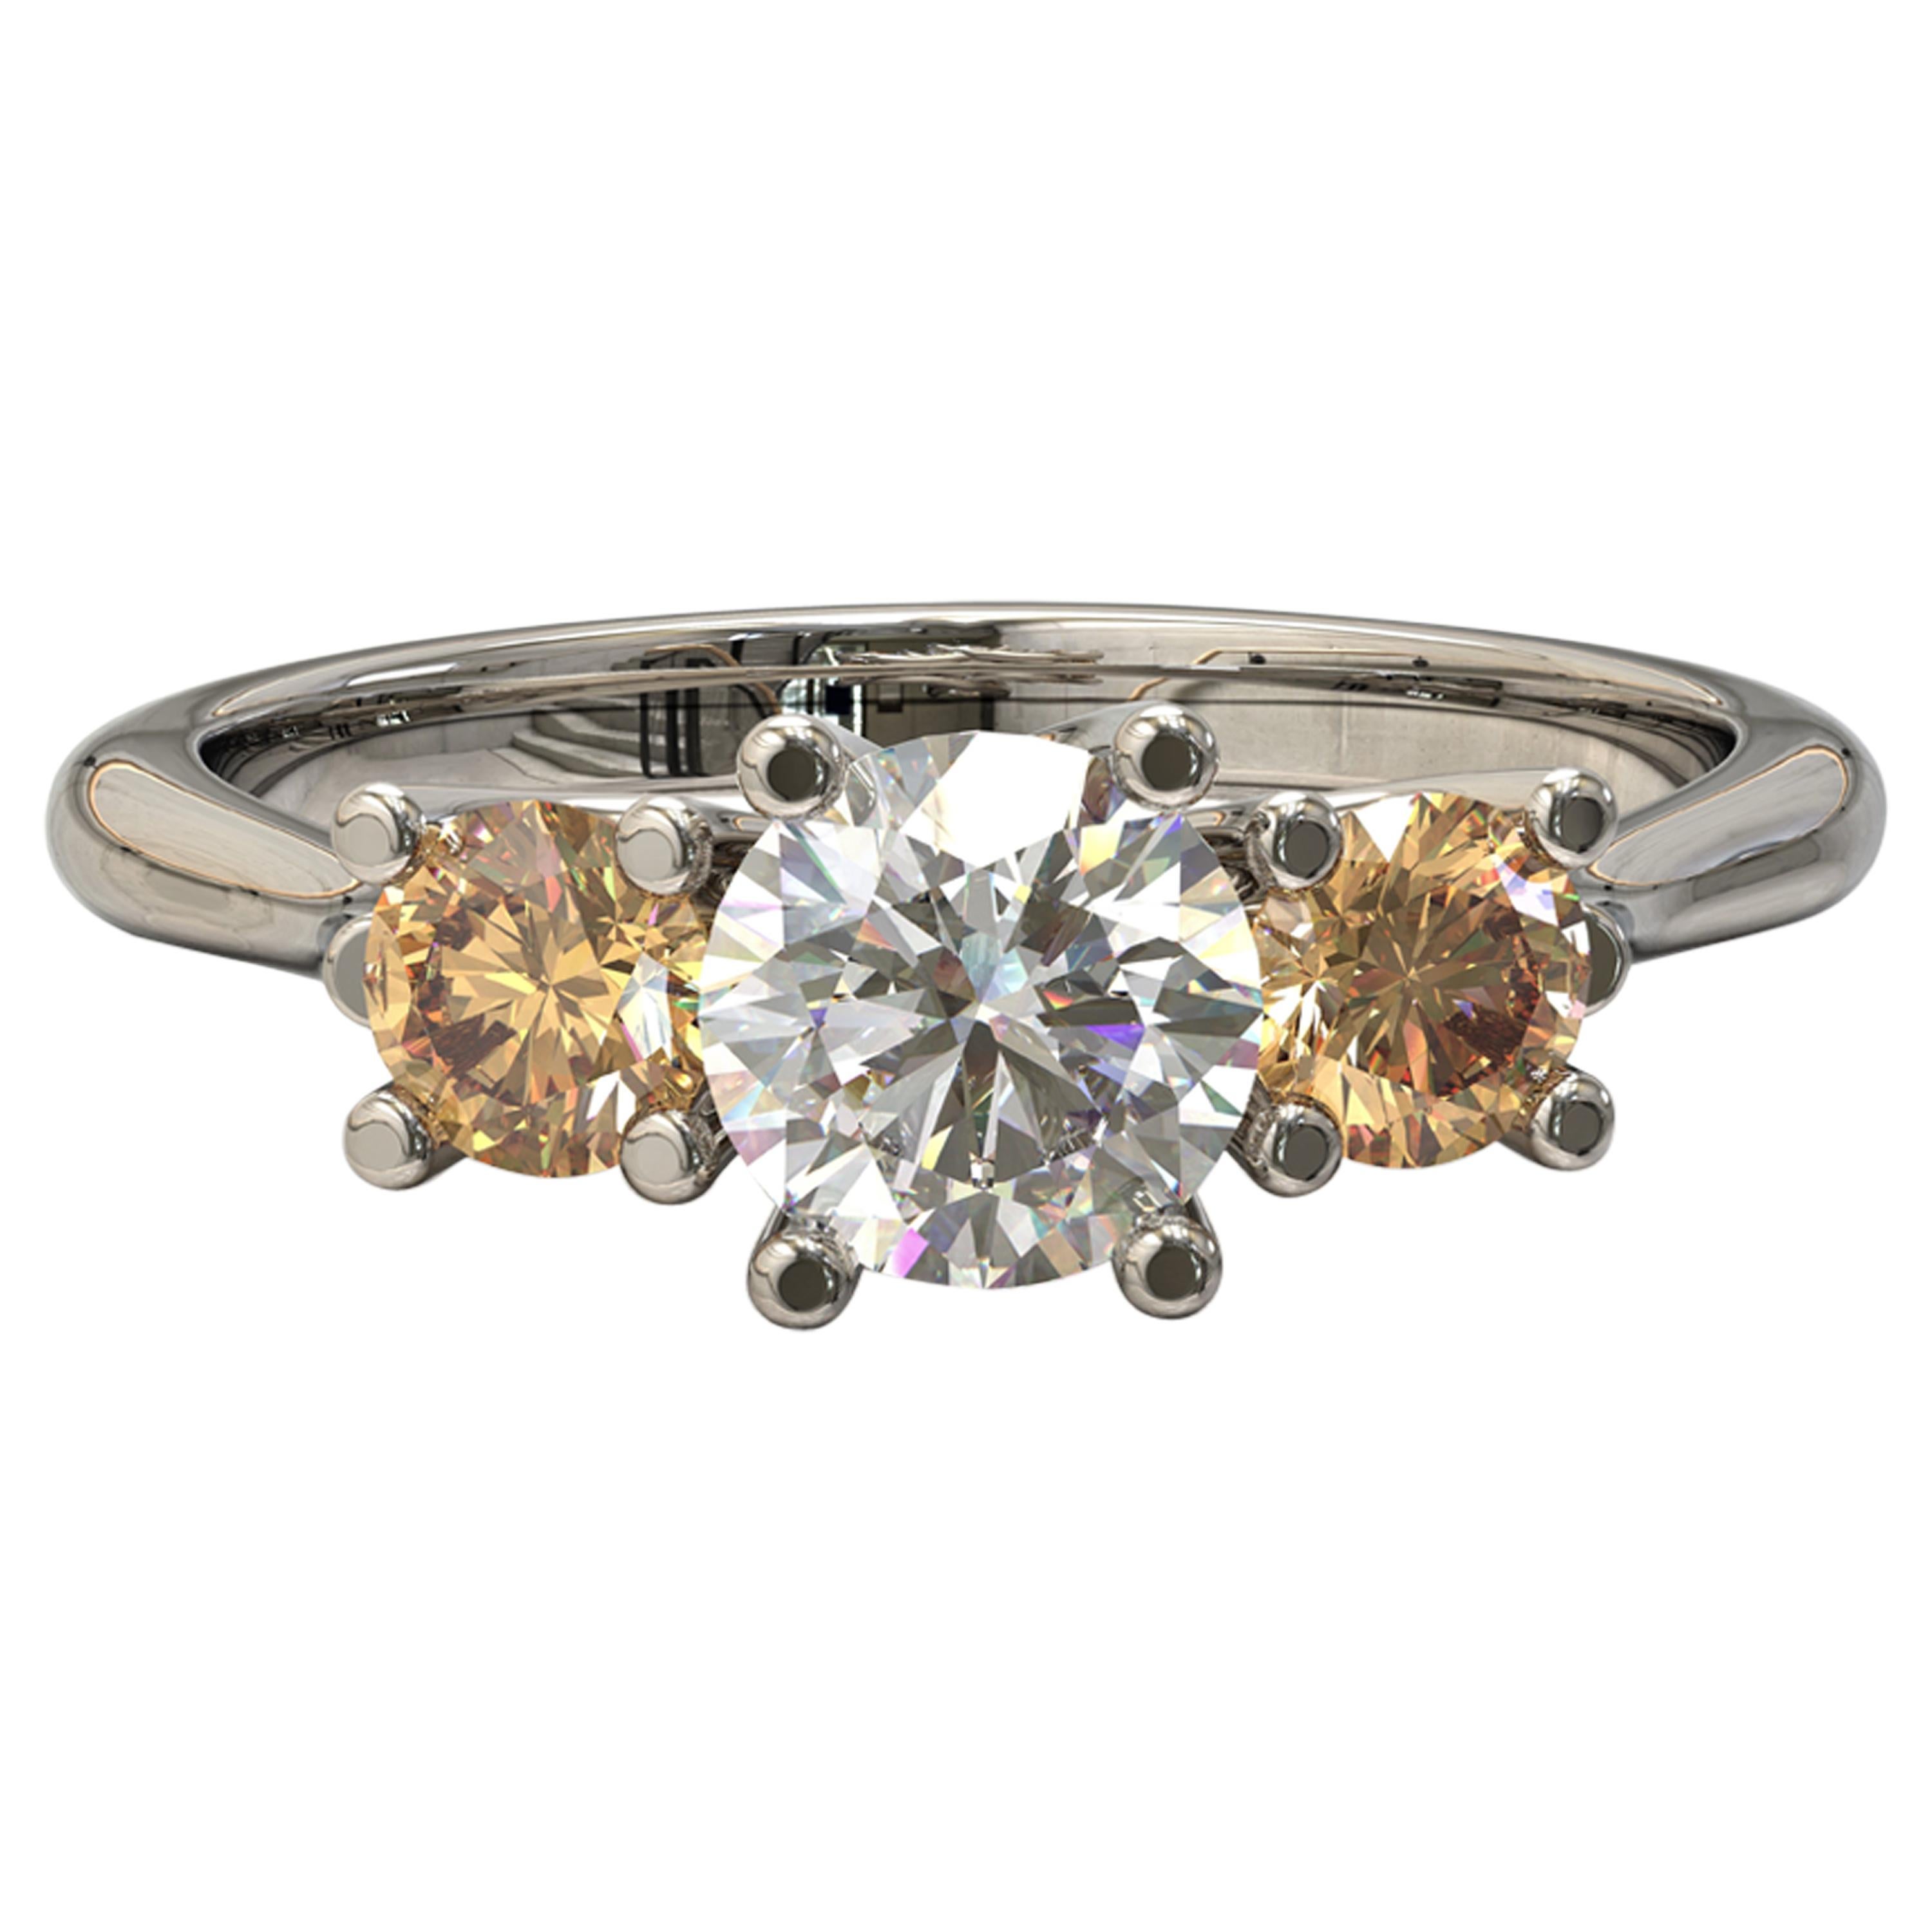 Ring with a trio of gemstones

Centrally set within a round brilliant cut  diamond displays a beautiful vitreous lustre. Two round golden champagne diamonds are similarly set on either side. Simply gorgeous.
Round brilliant cut diamond: 
1= 0.5